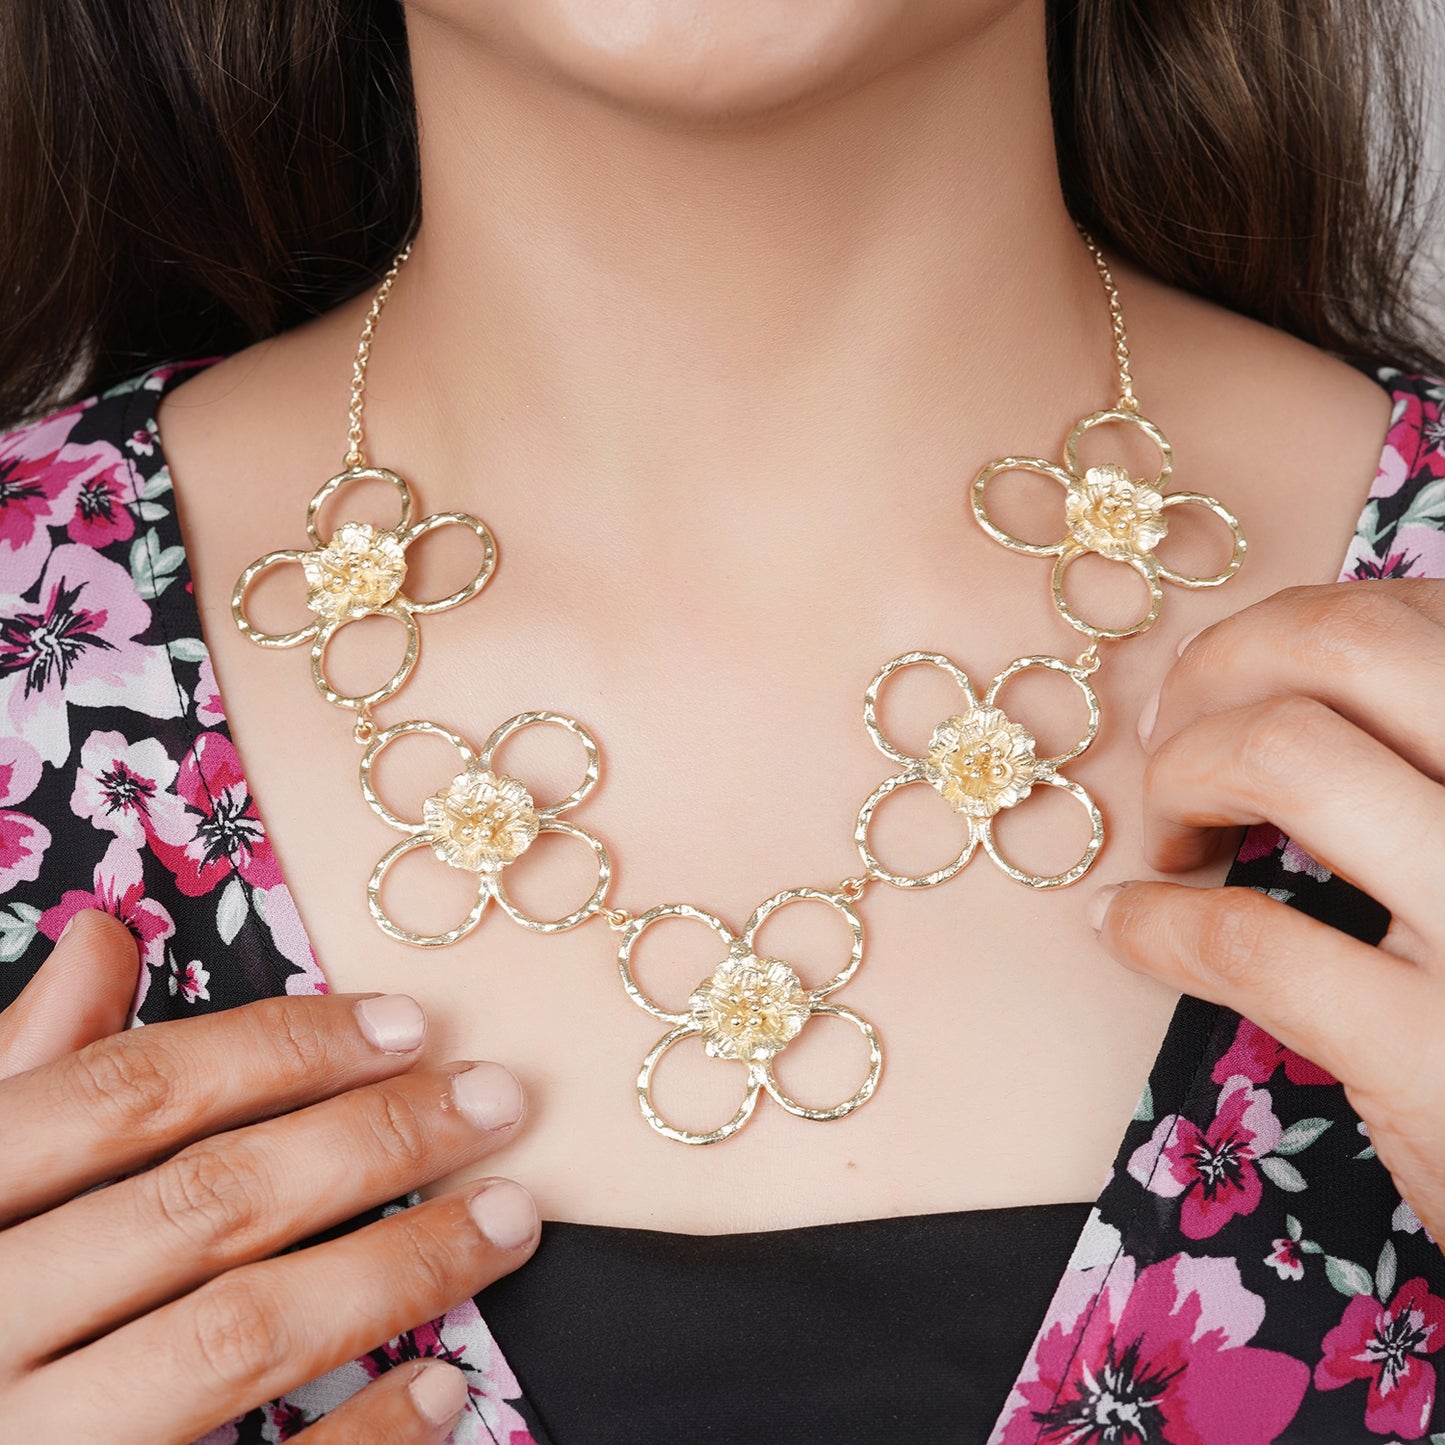 Wreath of Flowers Necklace